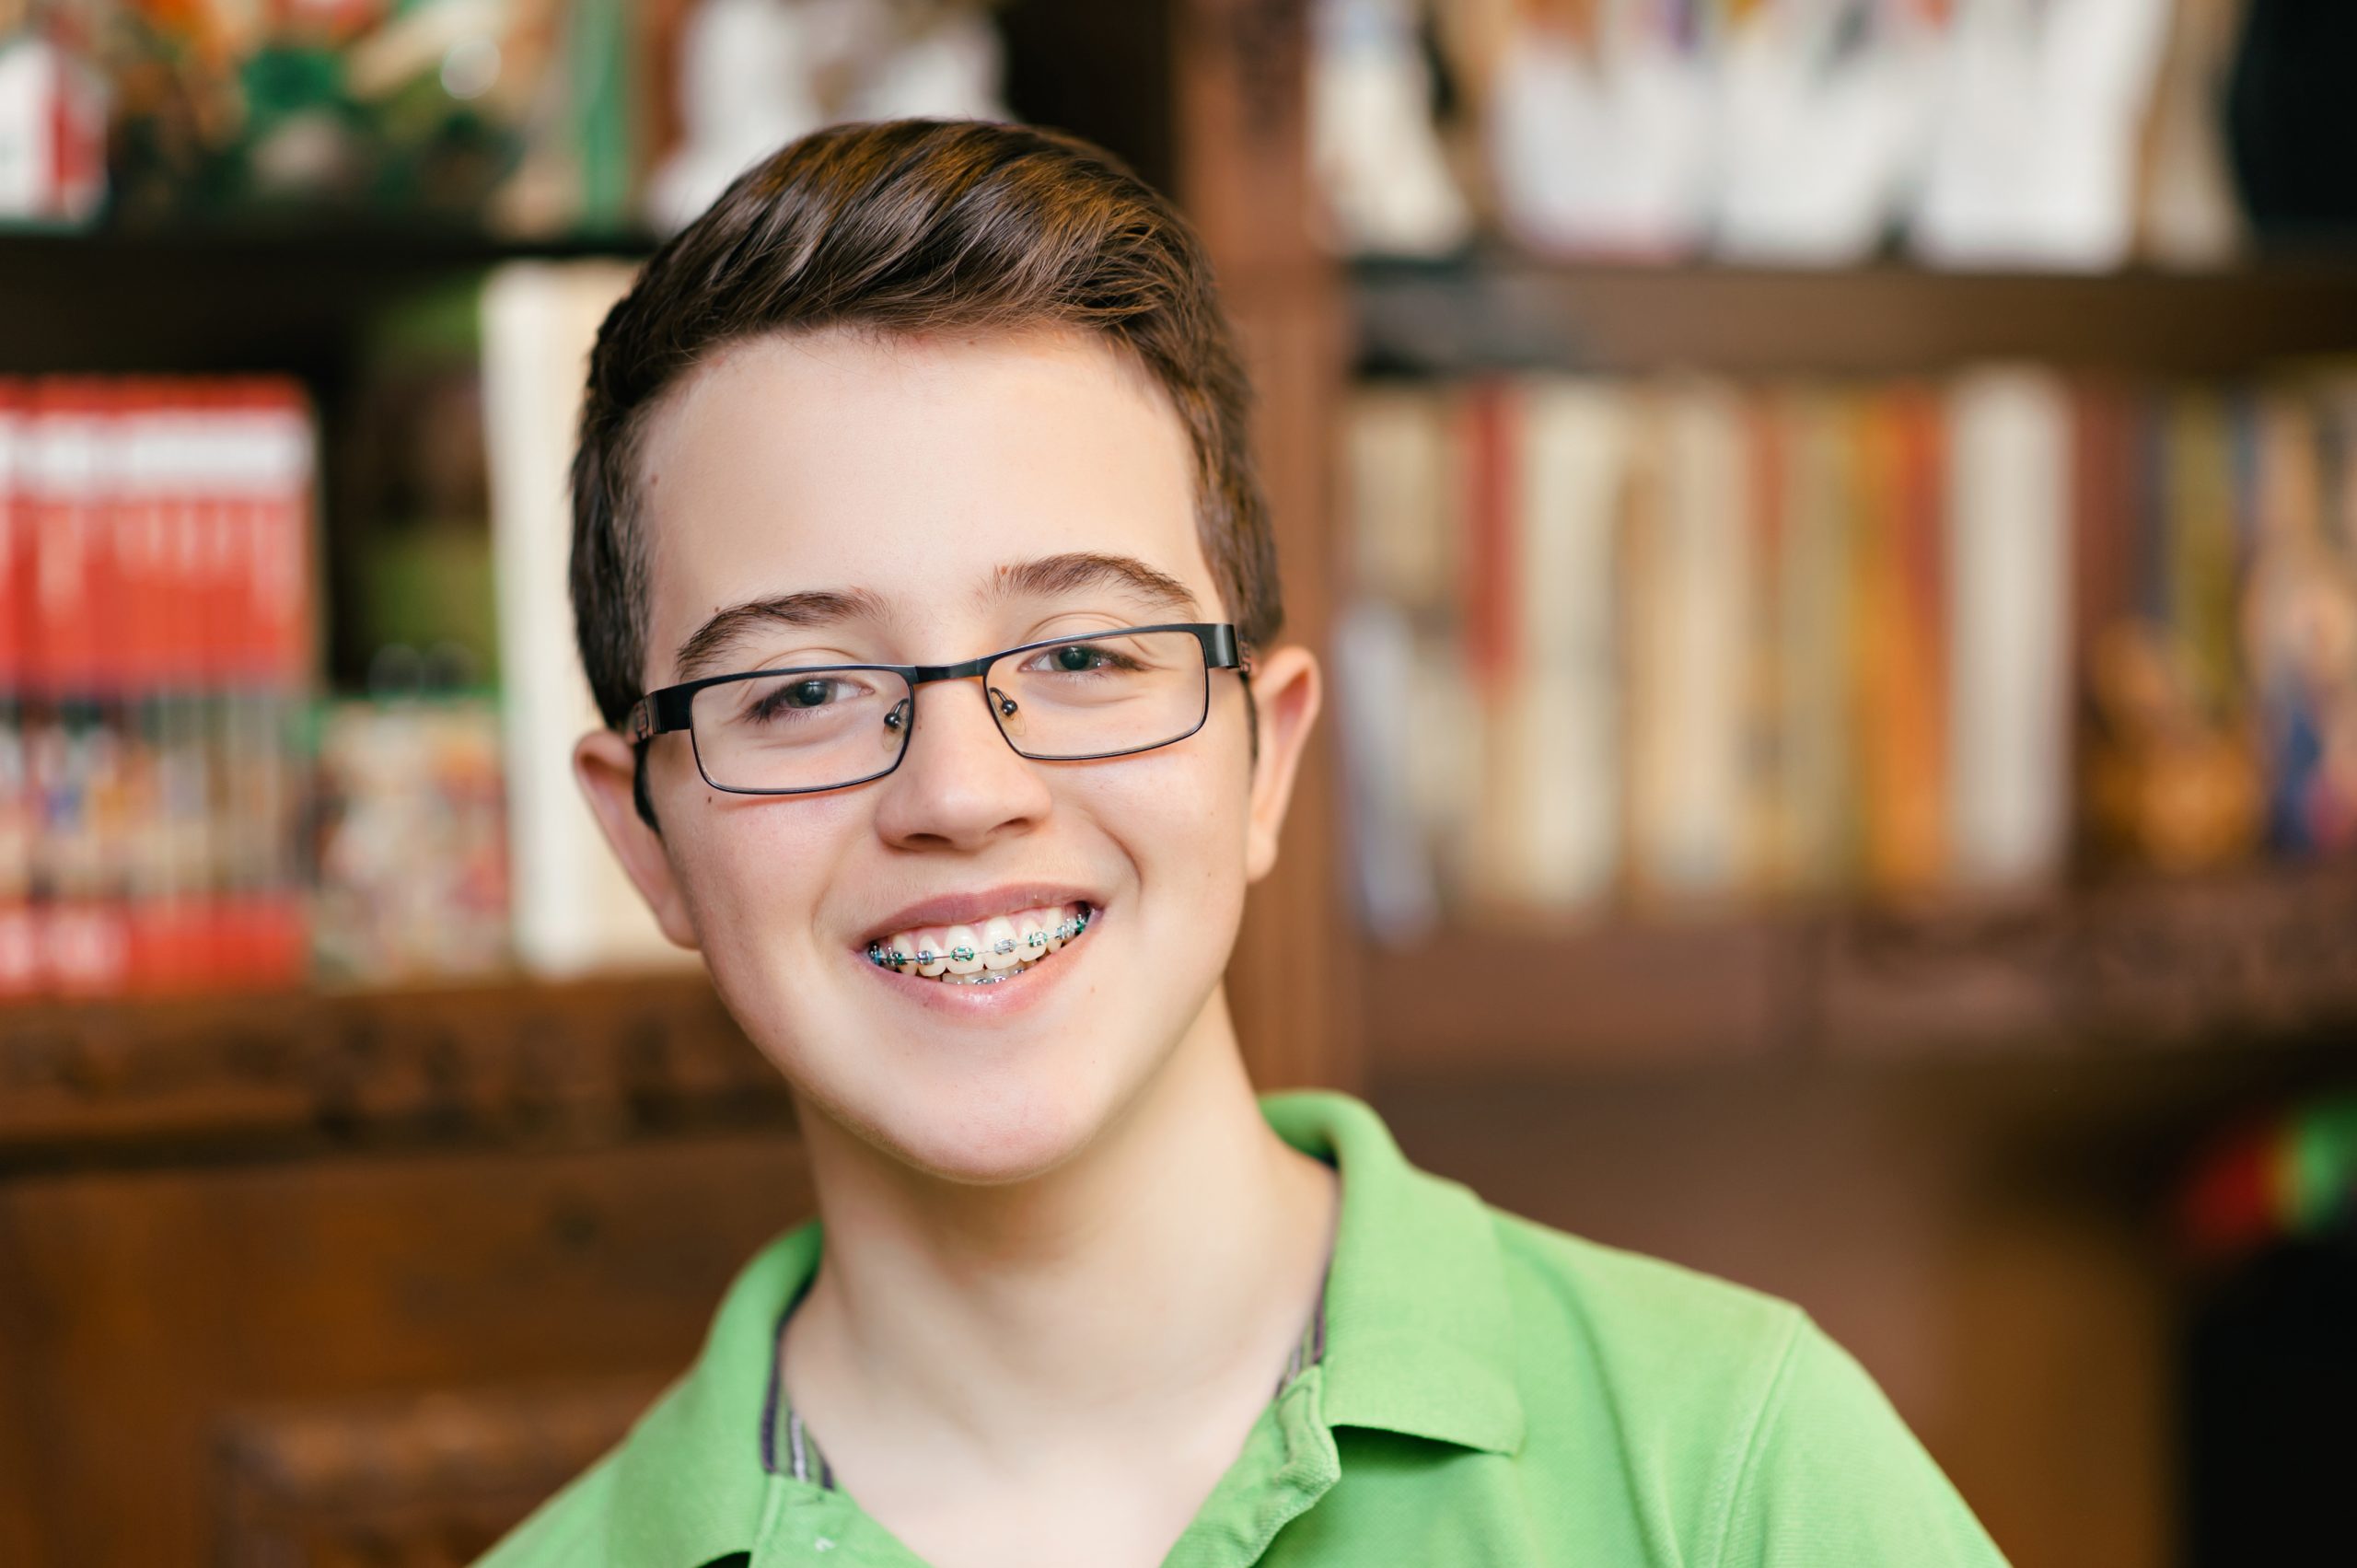 Boy with braces and a healthy smile.